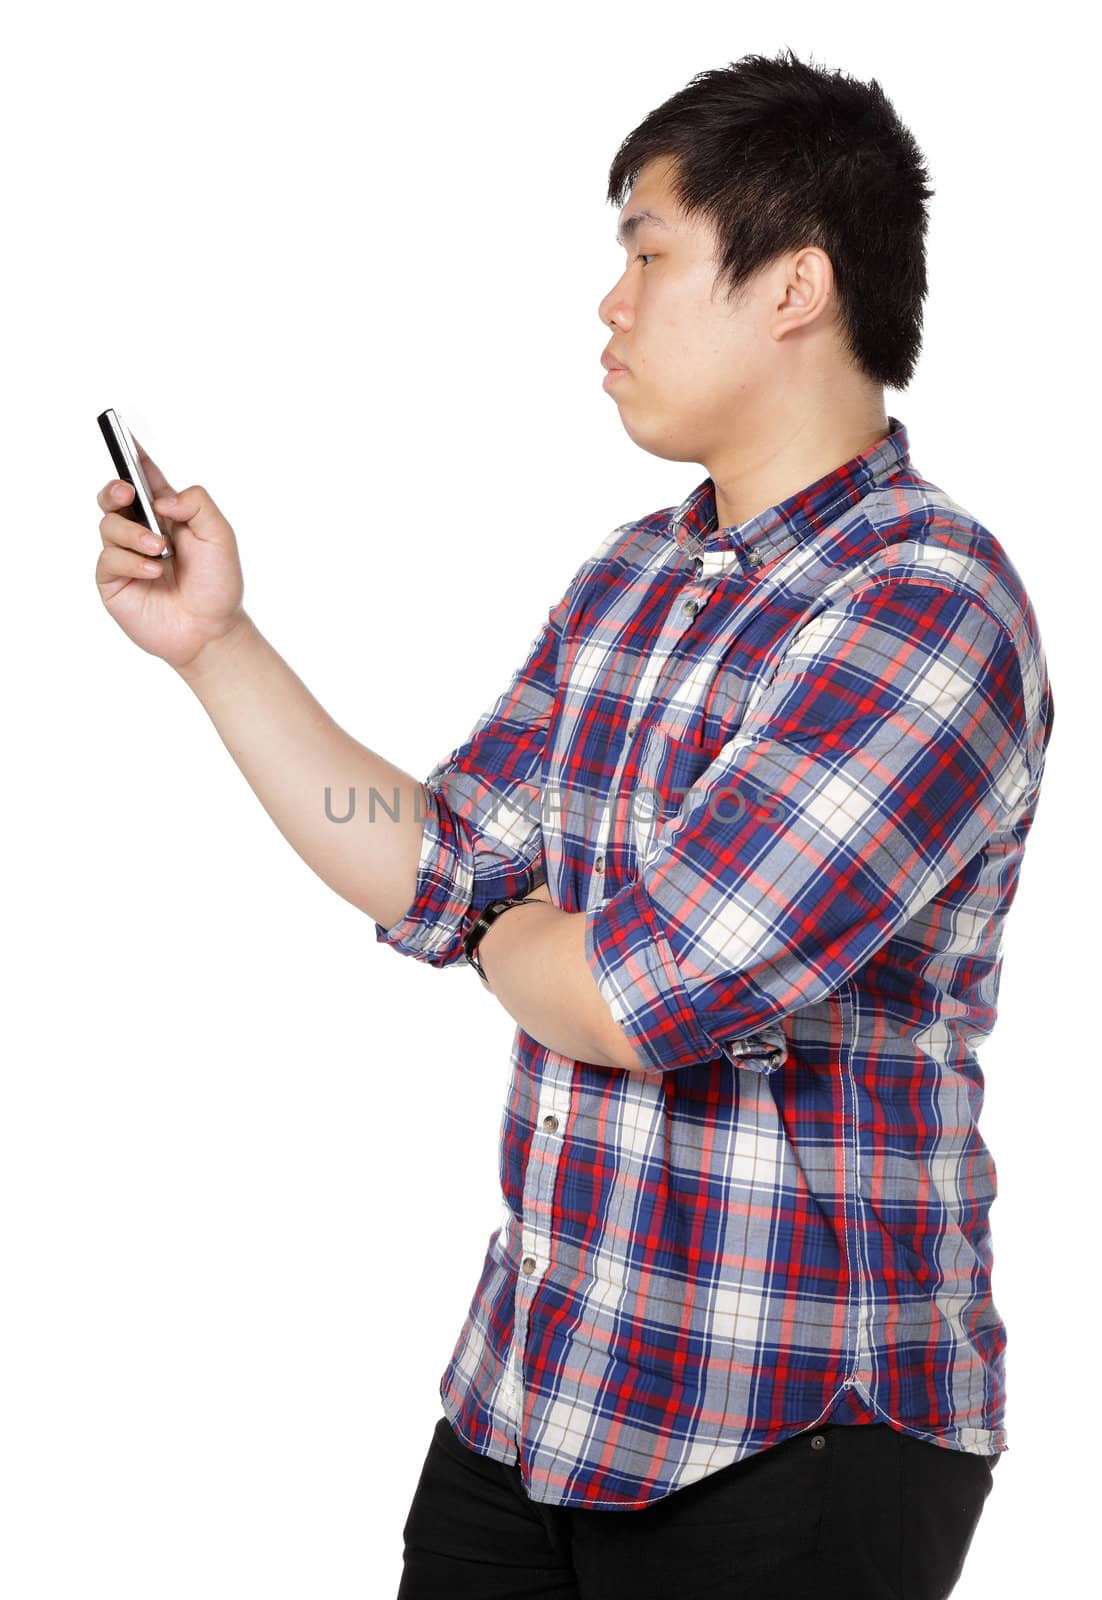 man writing message on mobile phone